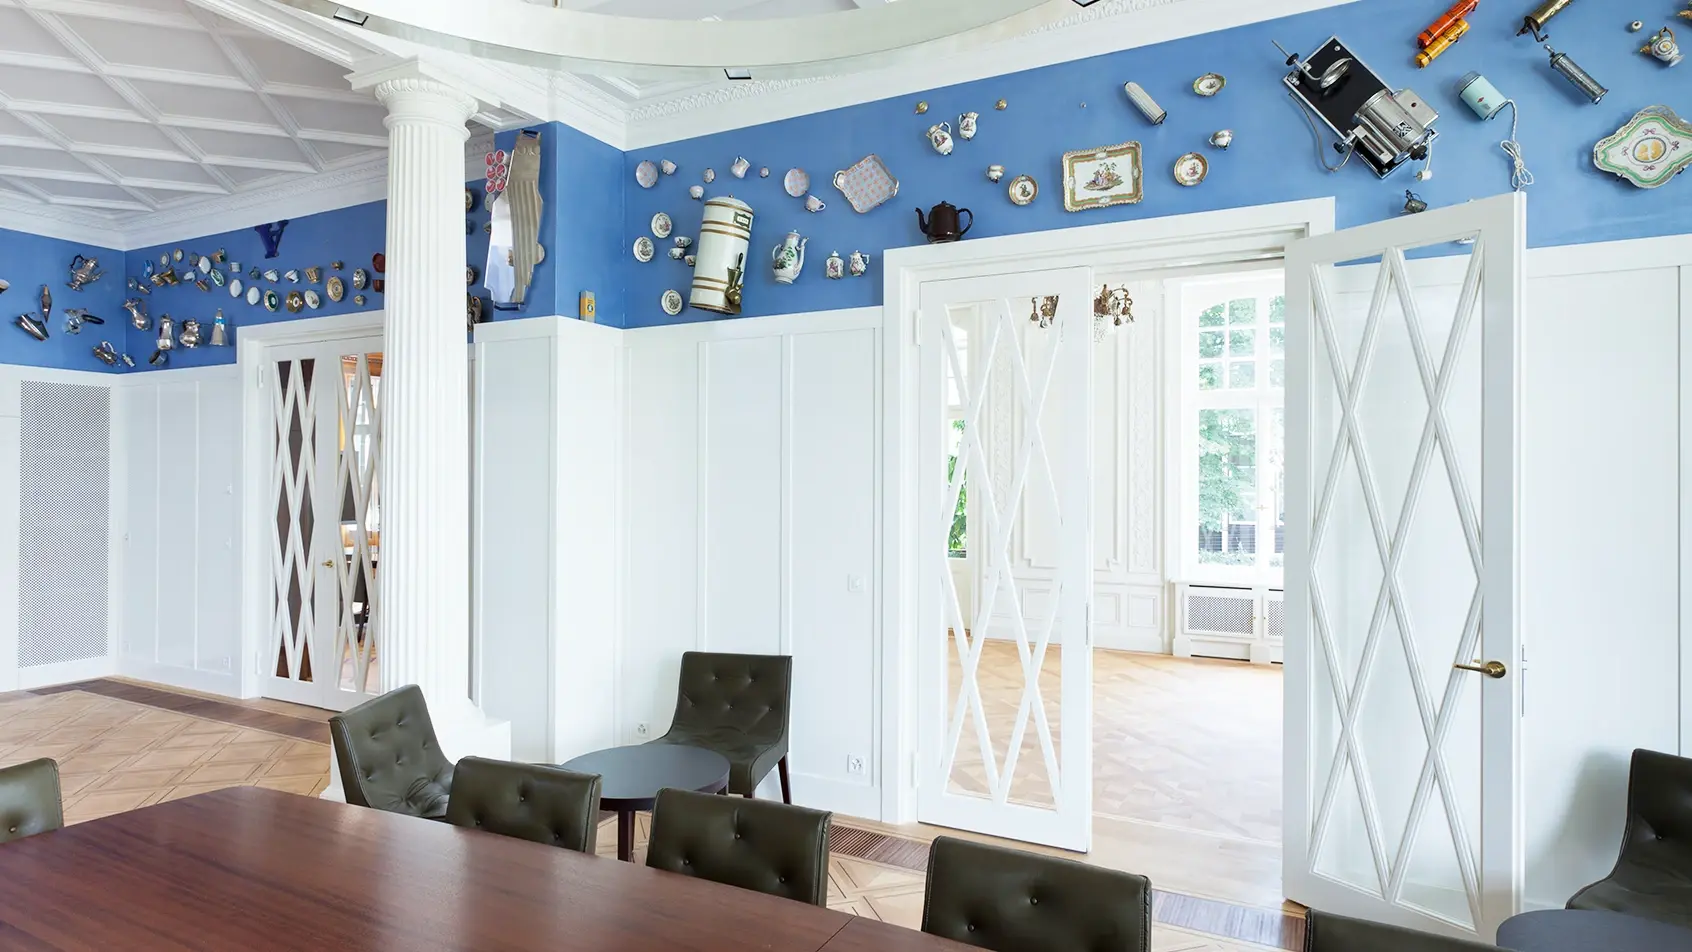 The impressive hall of the Jacobs Haus features a frieze filled with objects from the collection of Klaus J. Jacobs. These objects – ranging from the Thonet chair to the Melitta filter – testify to the building’s rich history.